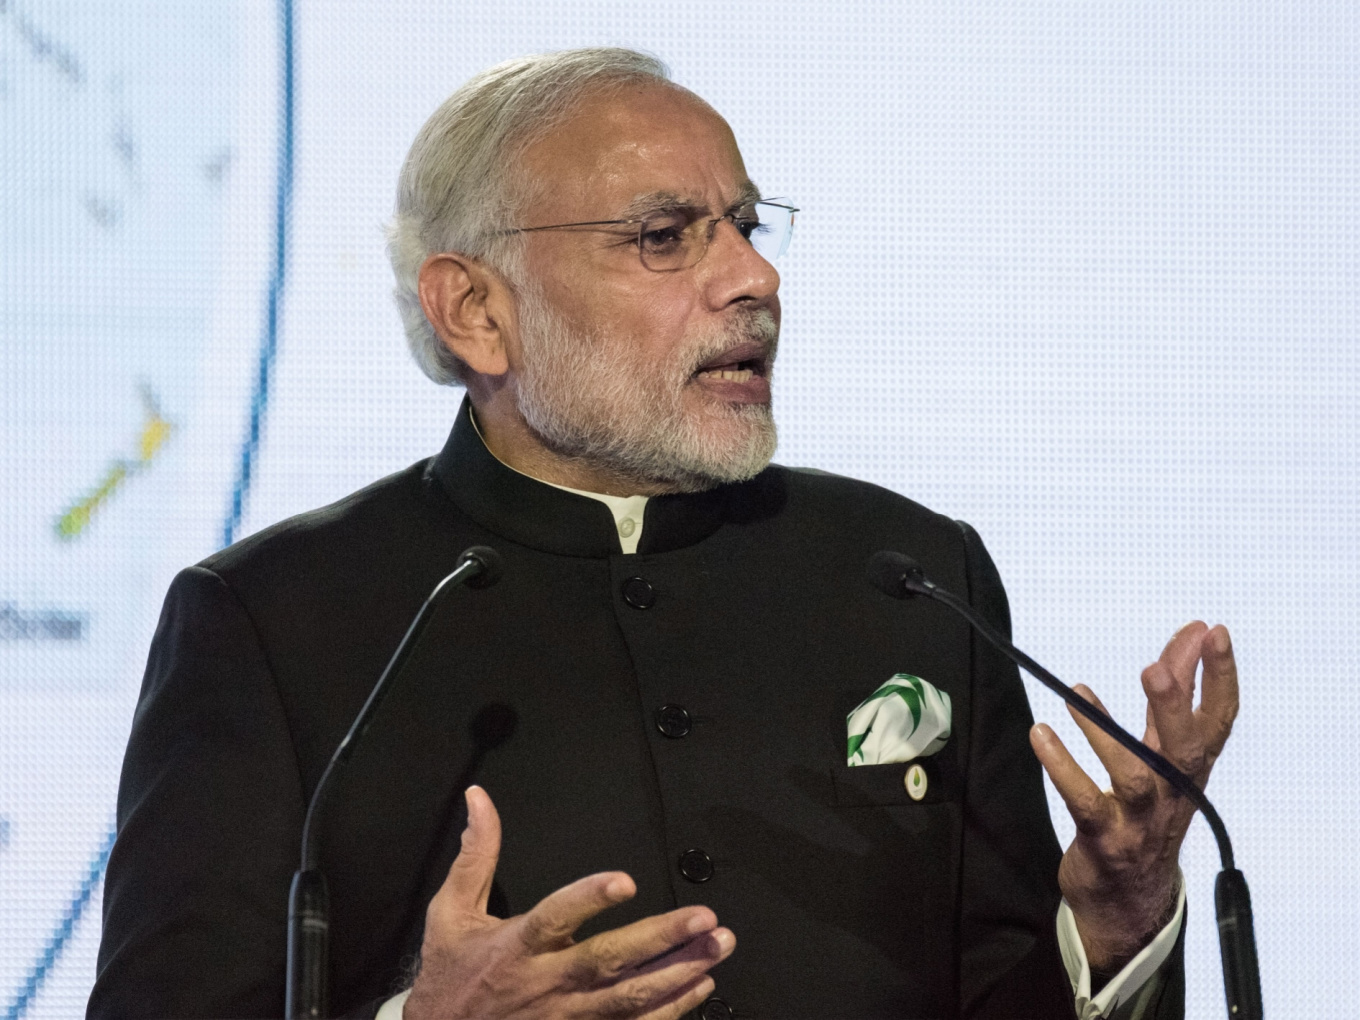 After Successful 5G Rollout, India Aims To Be A Leader In 6G: PM Modi